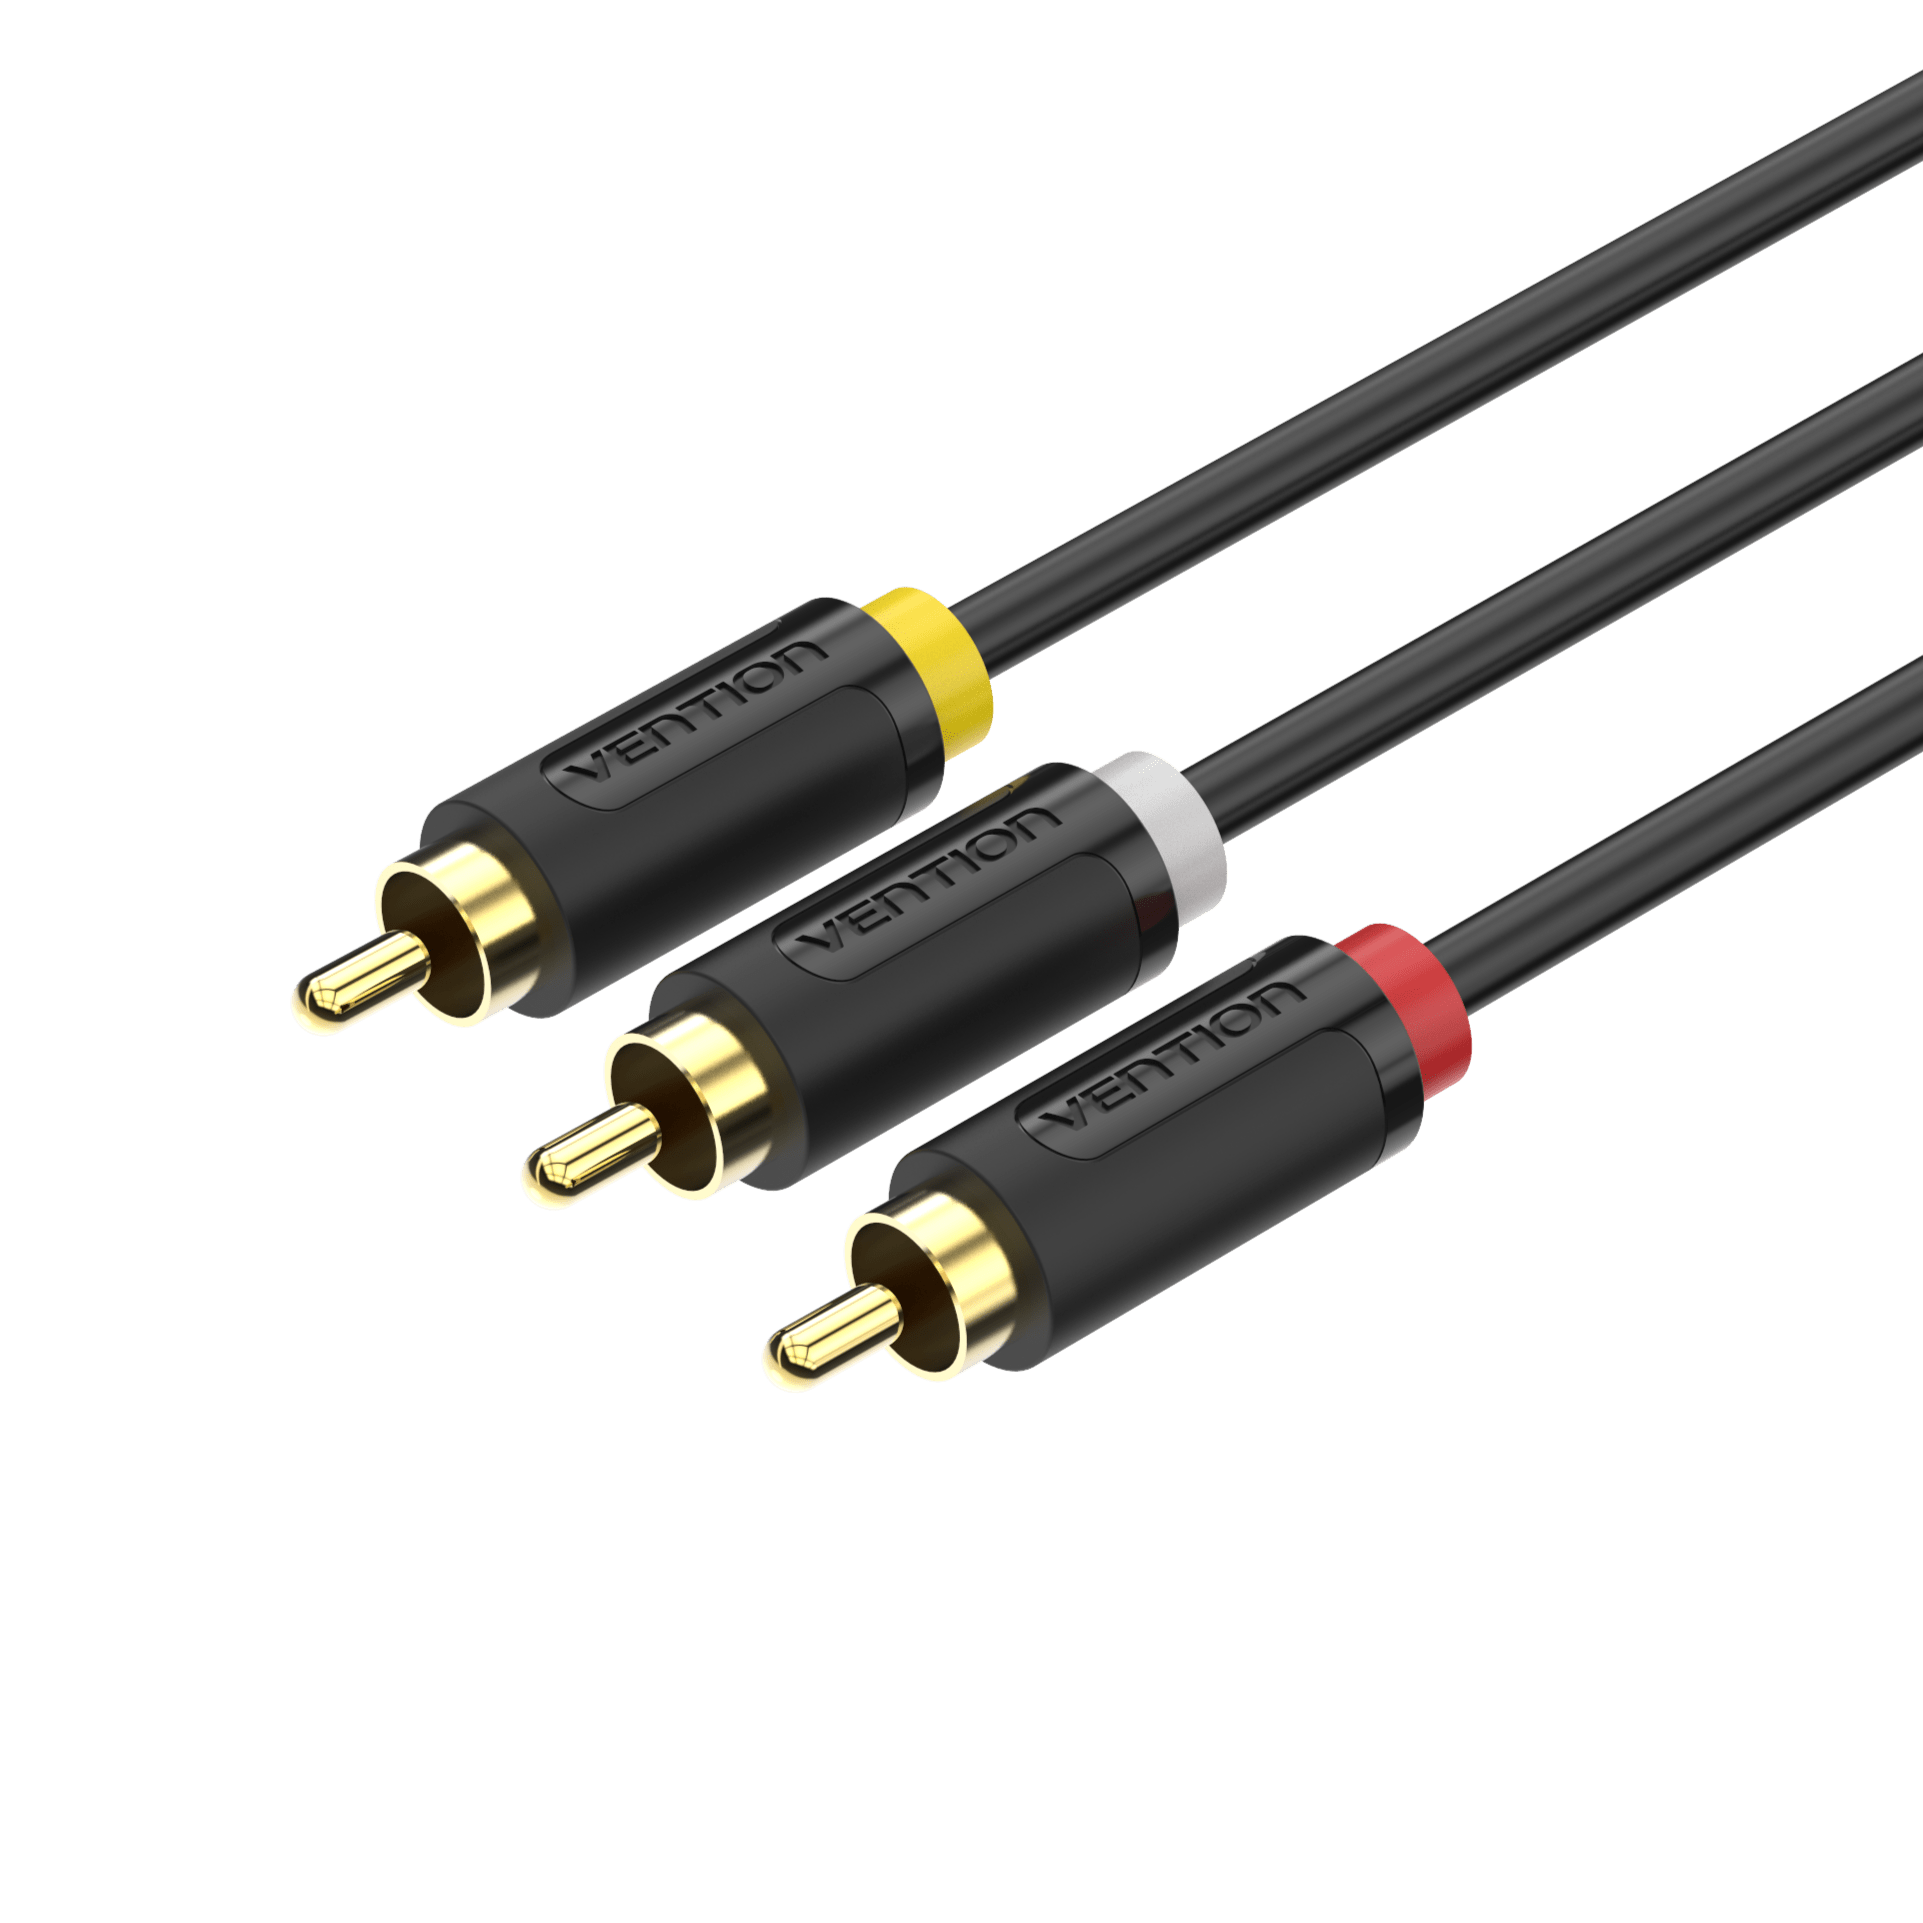 VENTION 速卖通 3RCA to 3 RCA Cable Audio Video Male to Male AV Cable Gold Plated for STB DVD TV VCD Blueplayer Amplifier Cable RCA Jack